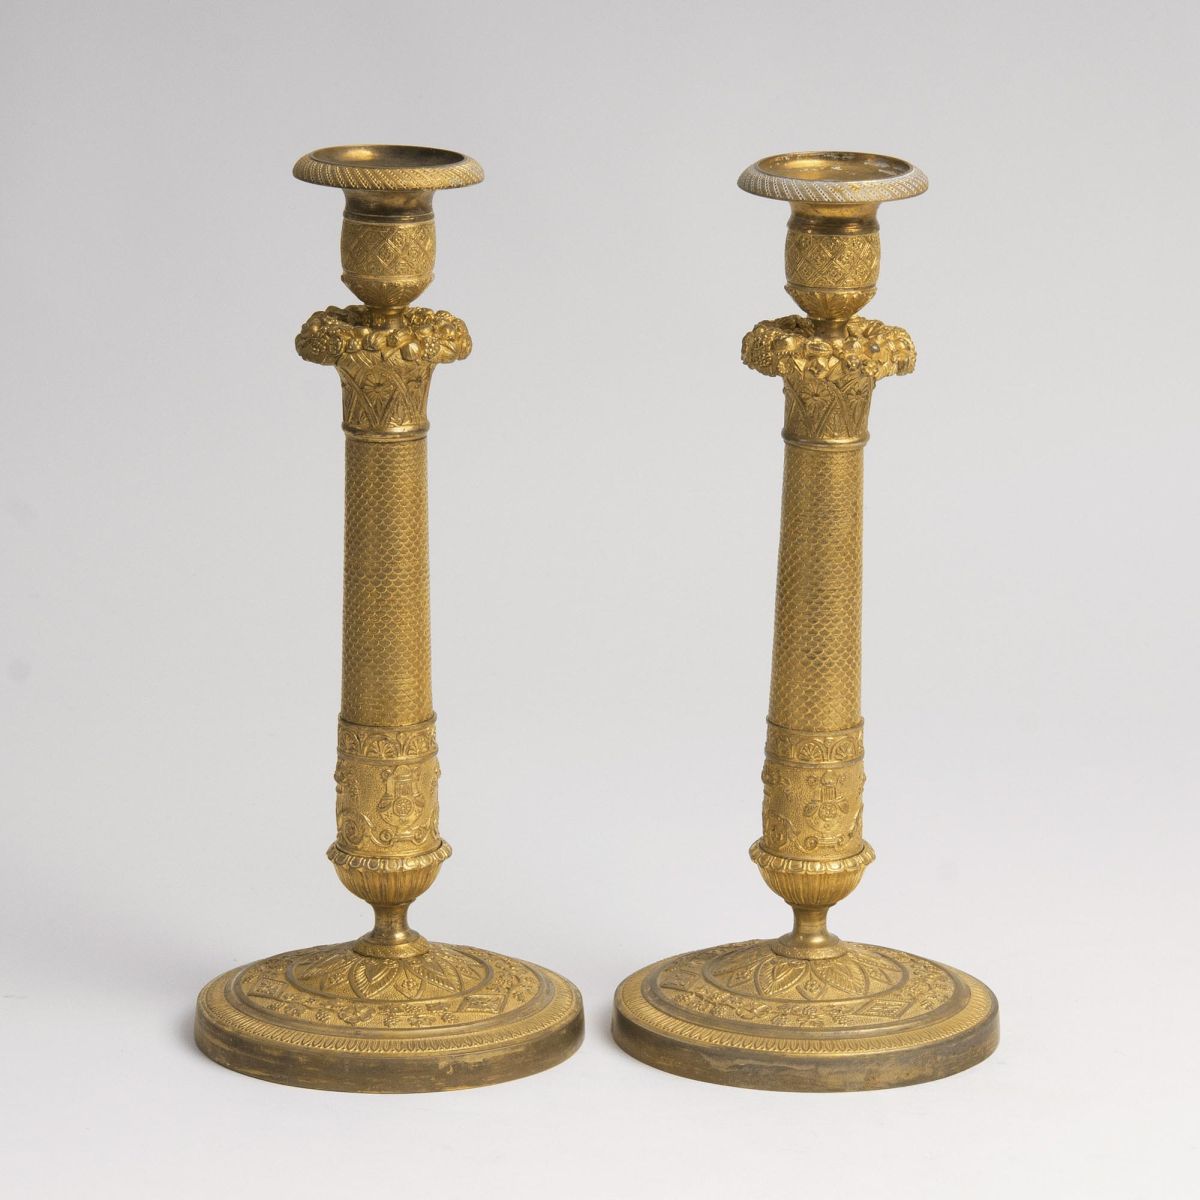 A Pair of Charles X Candlesticks